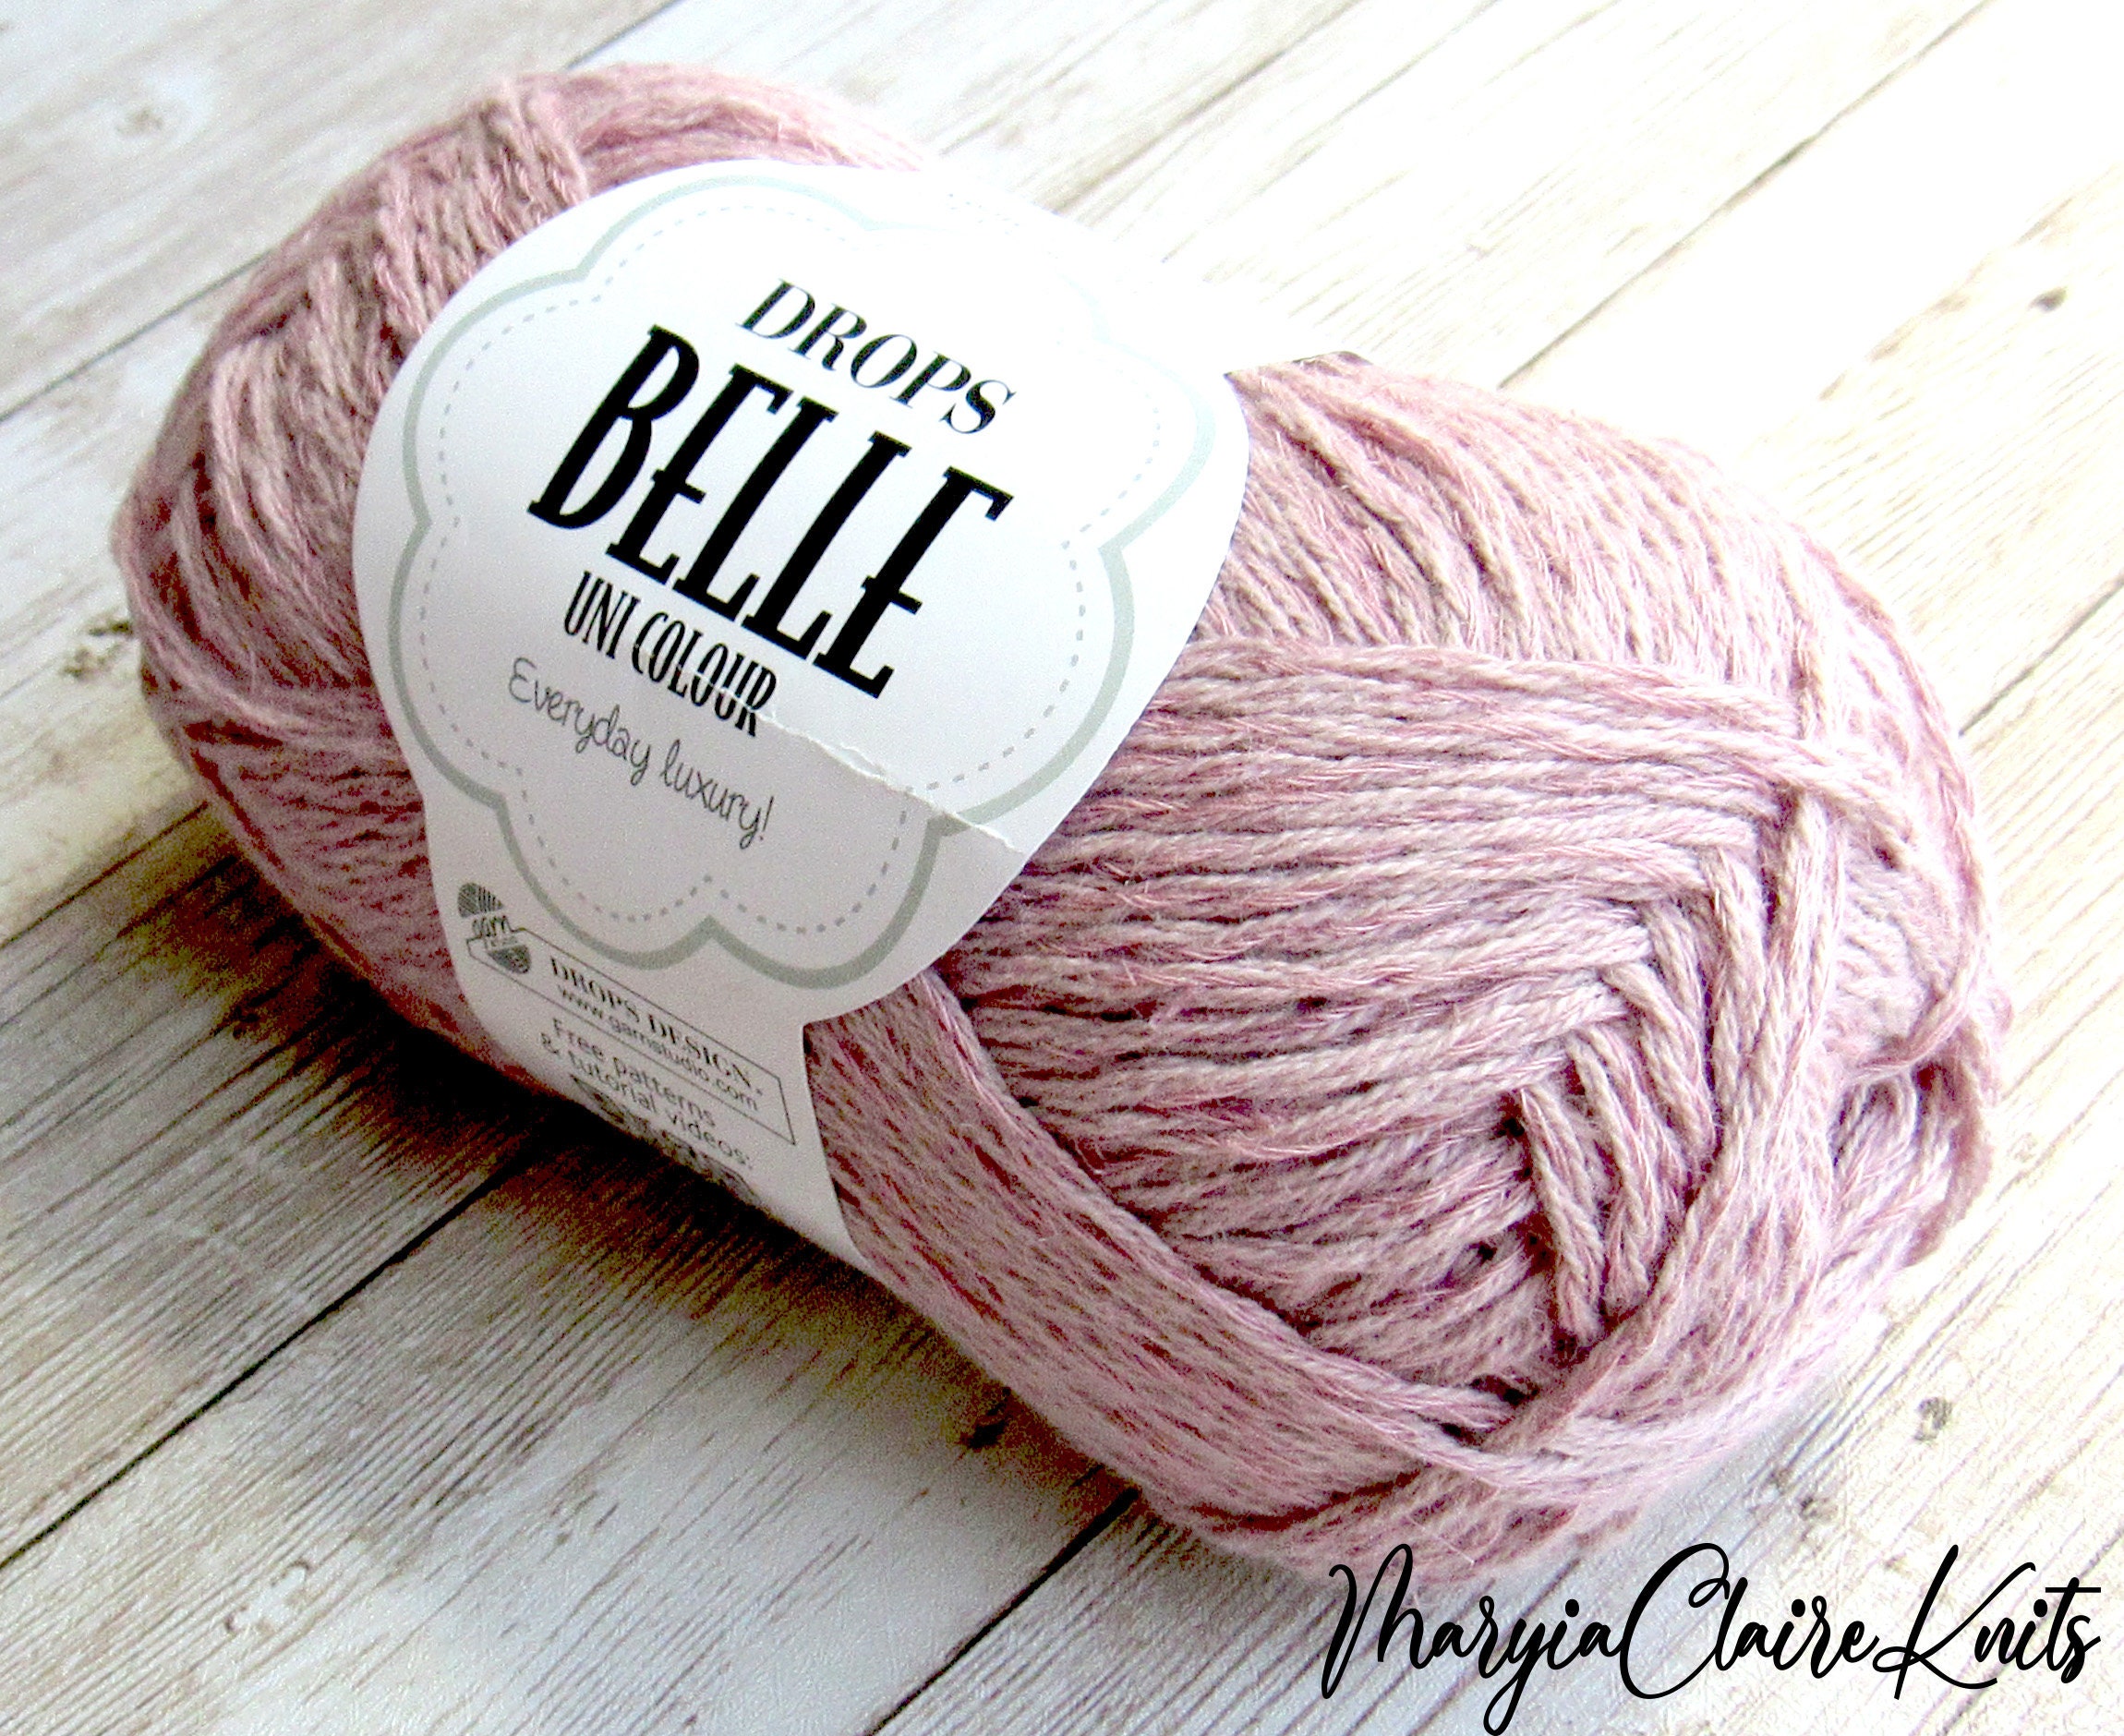 DROPS Belle - Get the best prices - Buy today